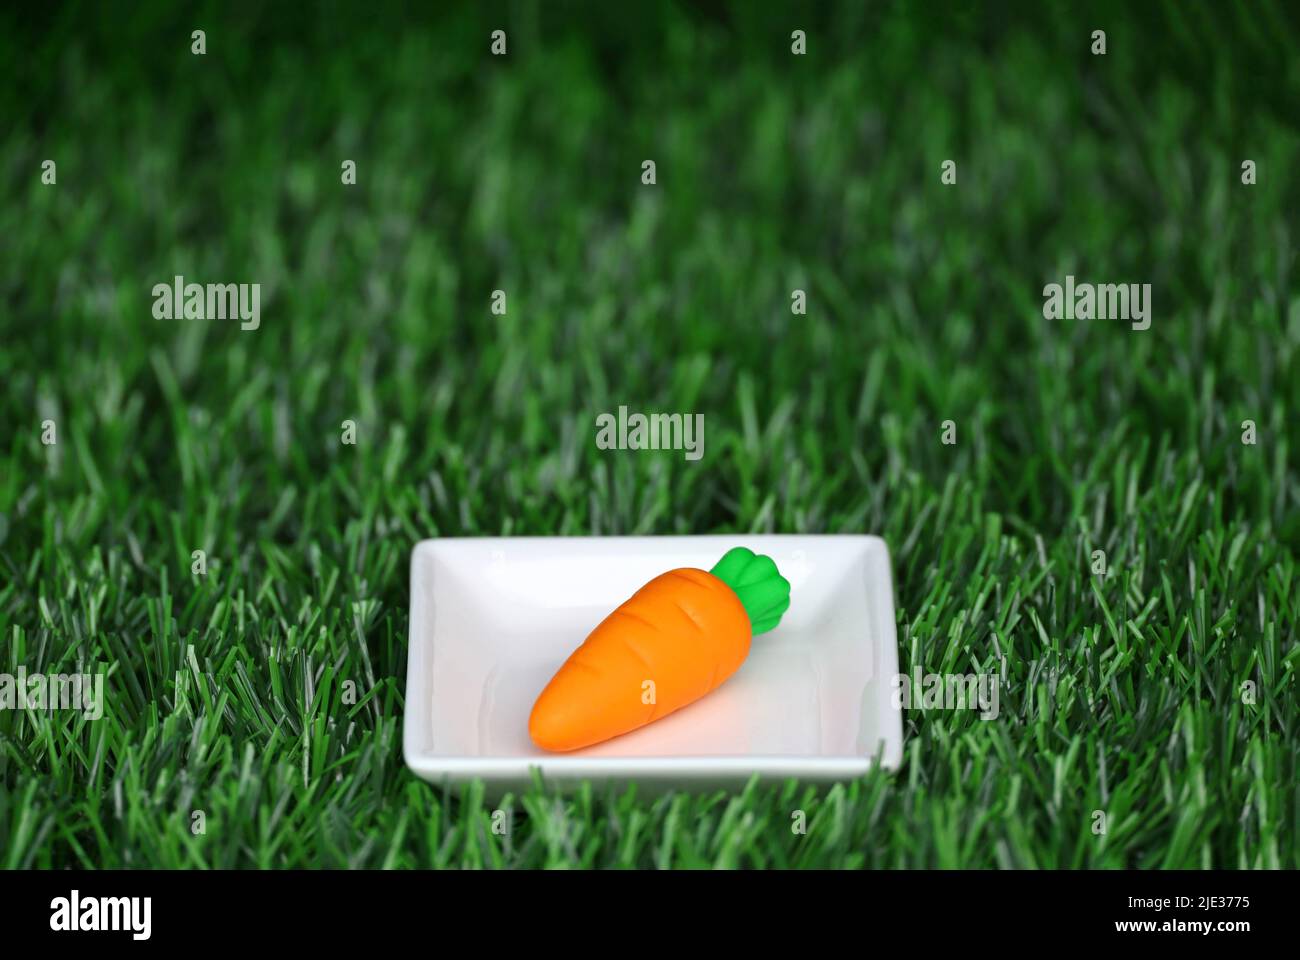 A miniature model of a colorful carrot placed on a white square plate Stock Photo